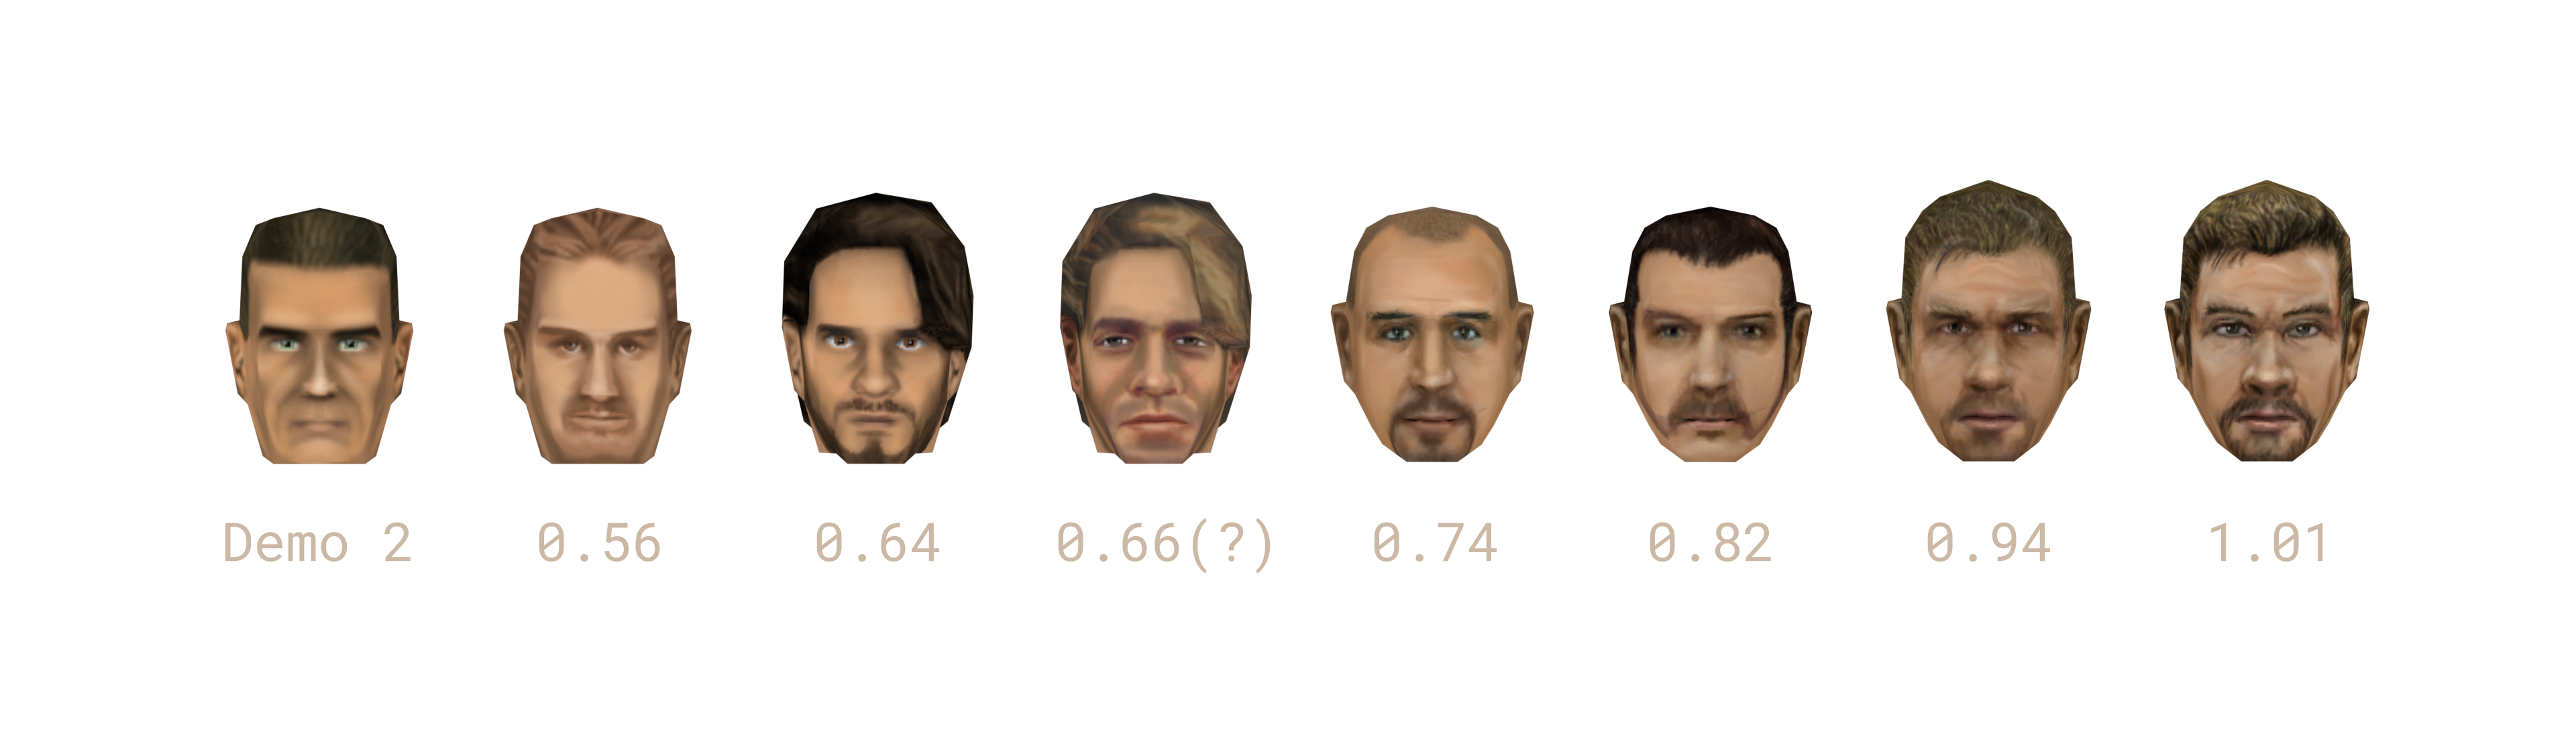 Evolution of the Hero faces from Demo 2 to 1.01/Vanilla